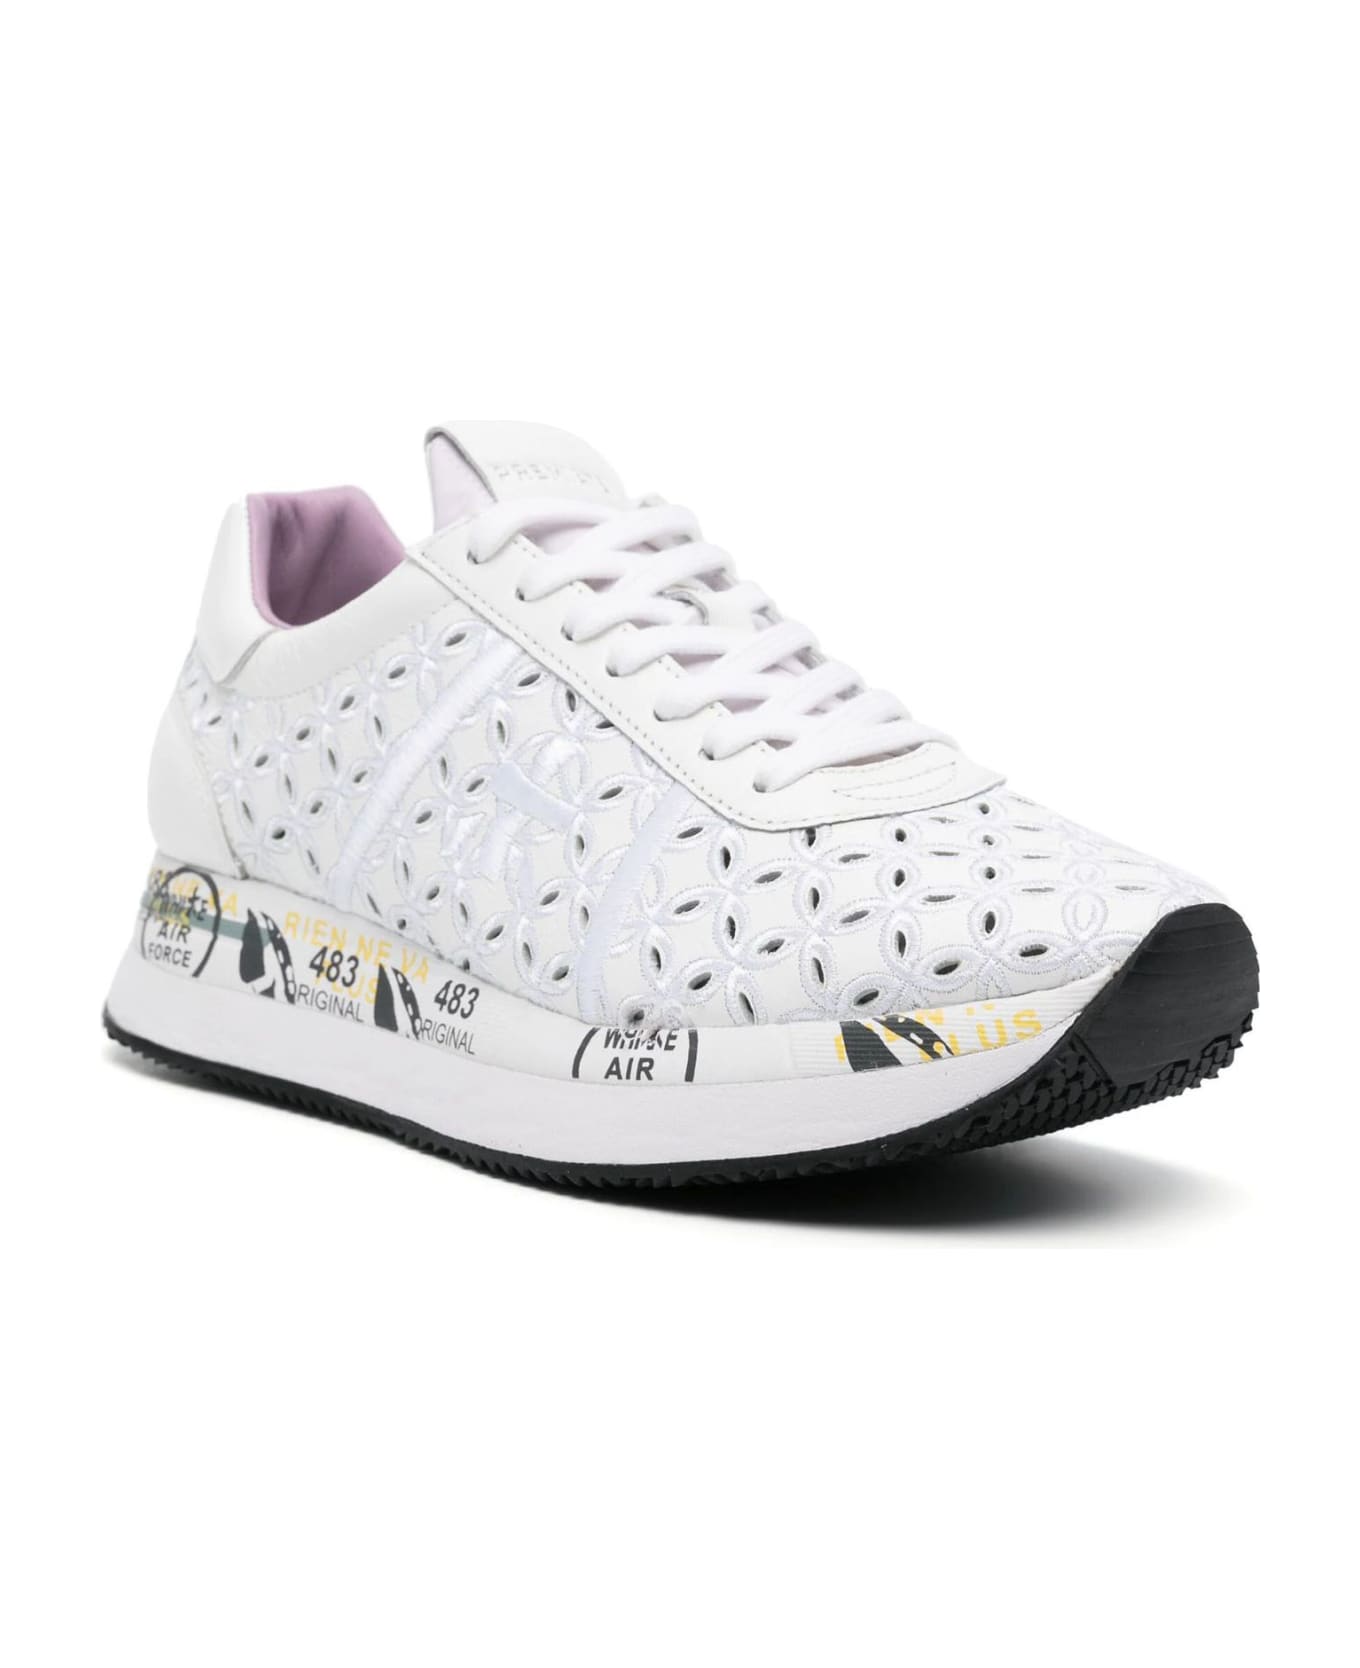 Premiata Conny Broderie-anglaise Sneakers - Bianco/nero